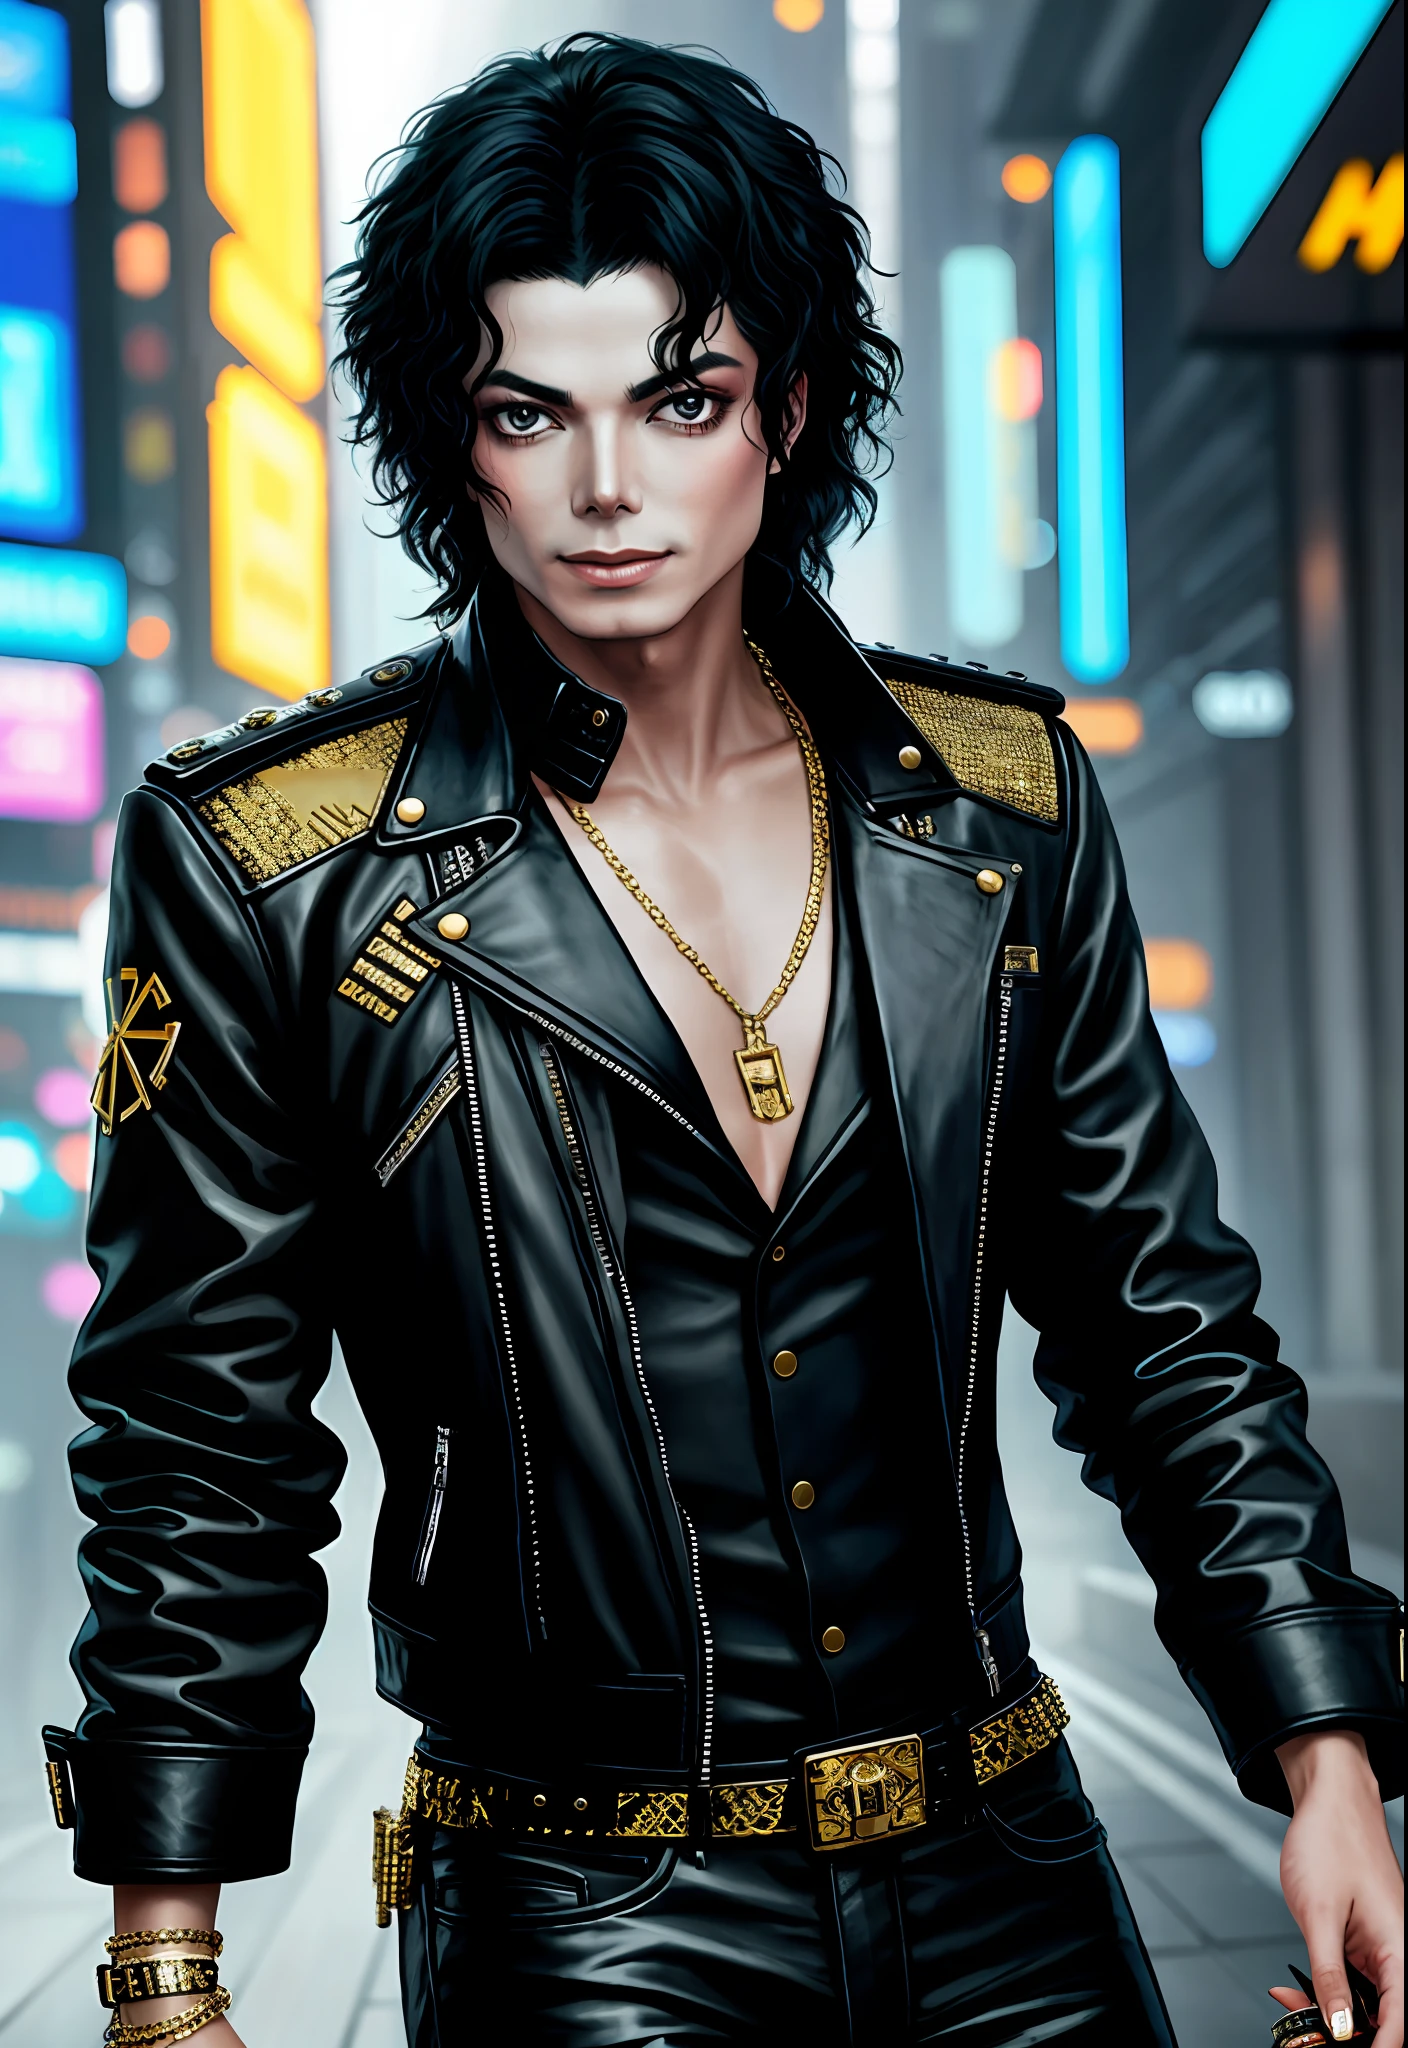 a painting of a Michael Jackson, background, style Cyberpunk 2077, band of gold round his breasts